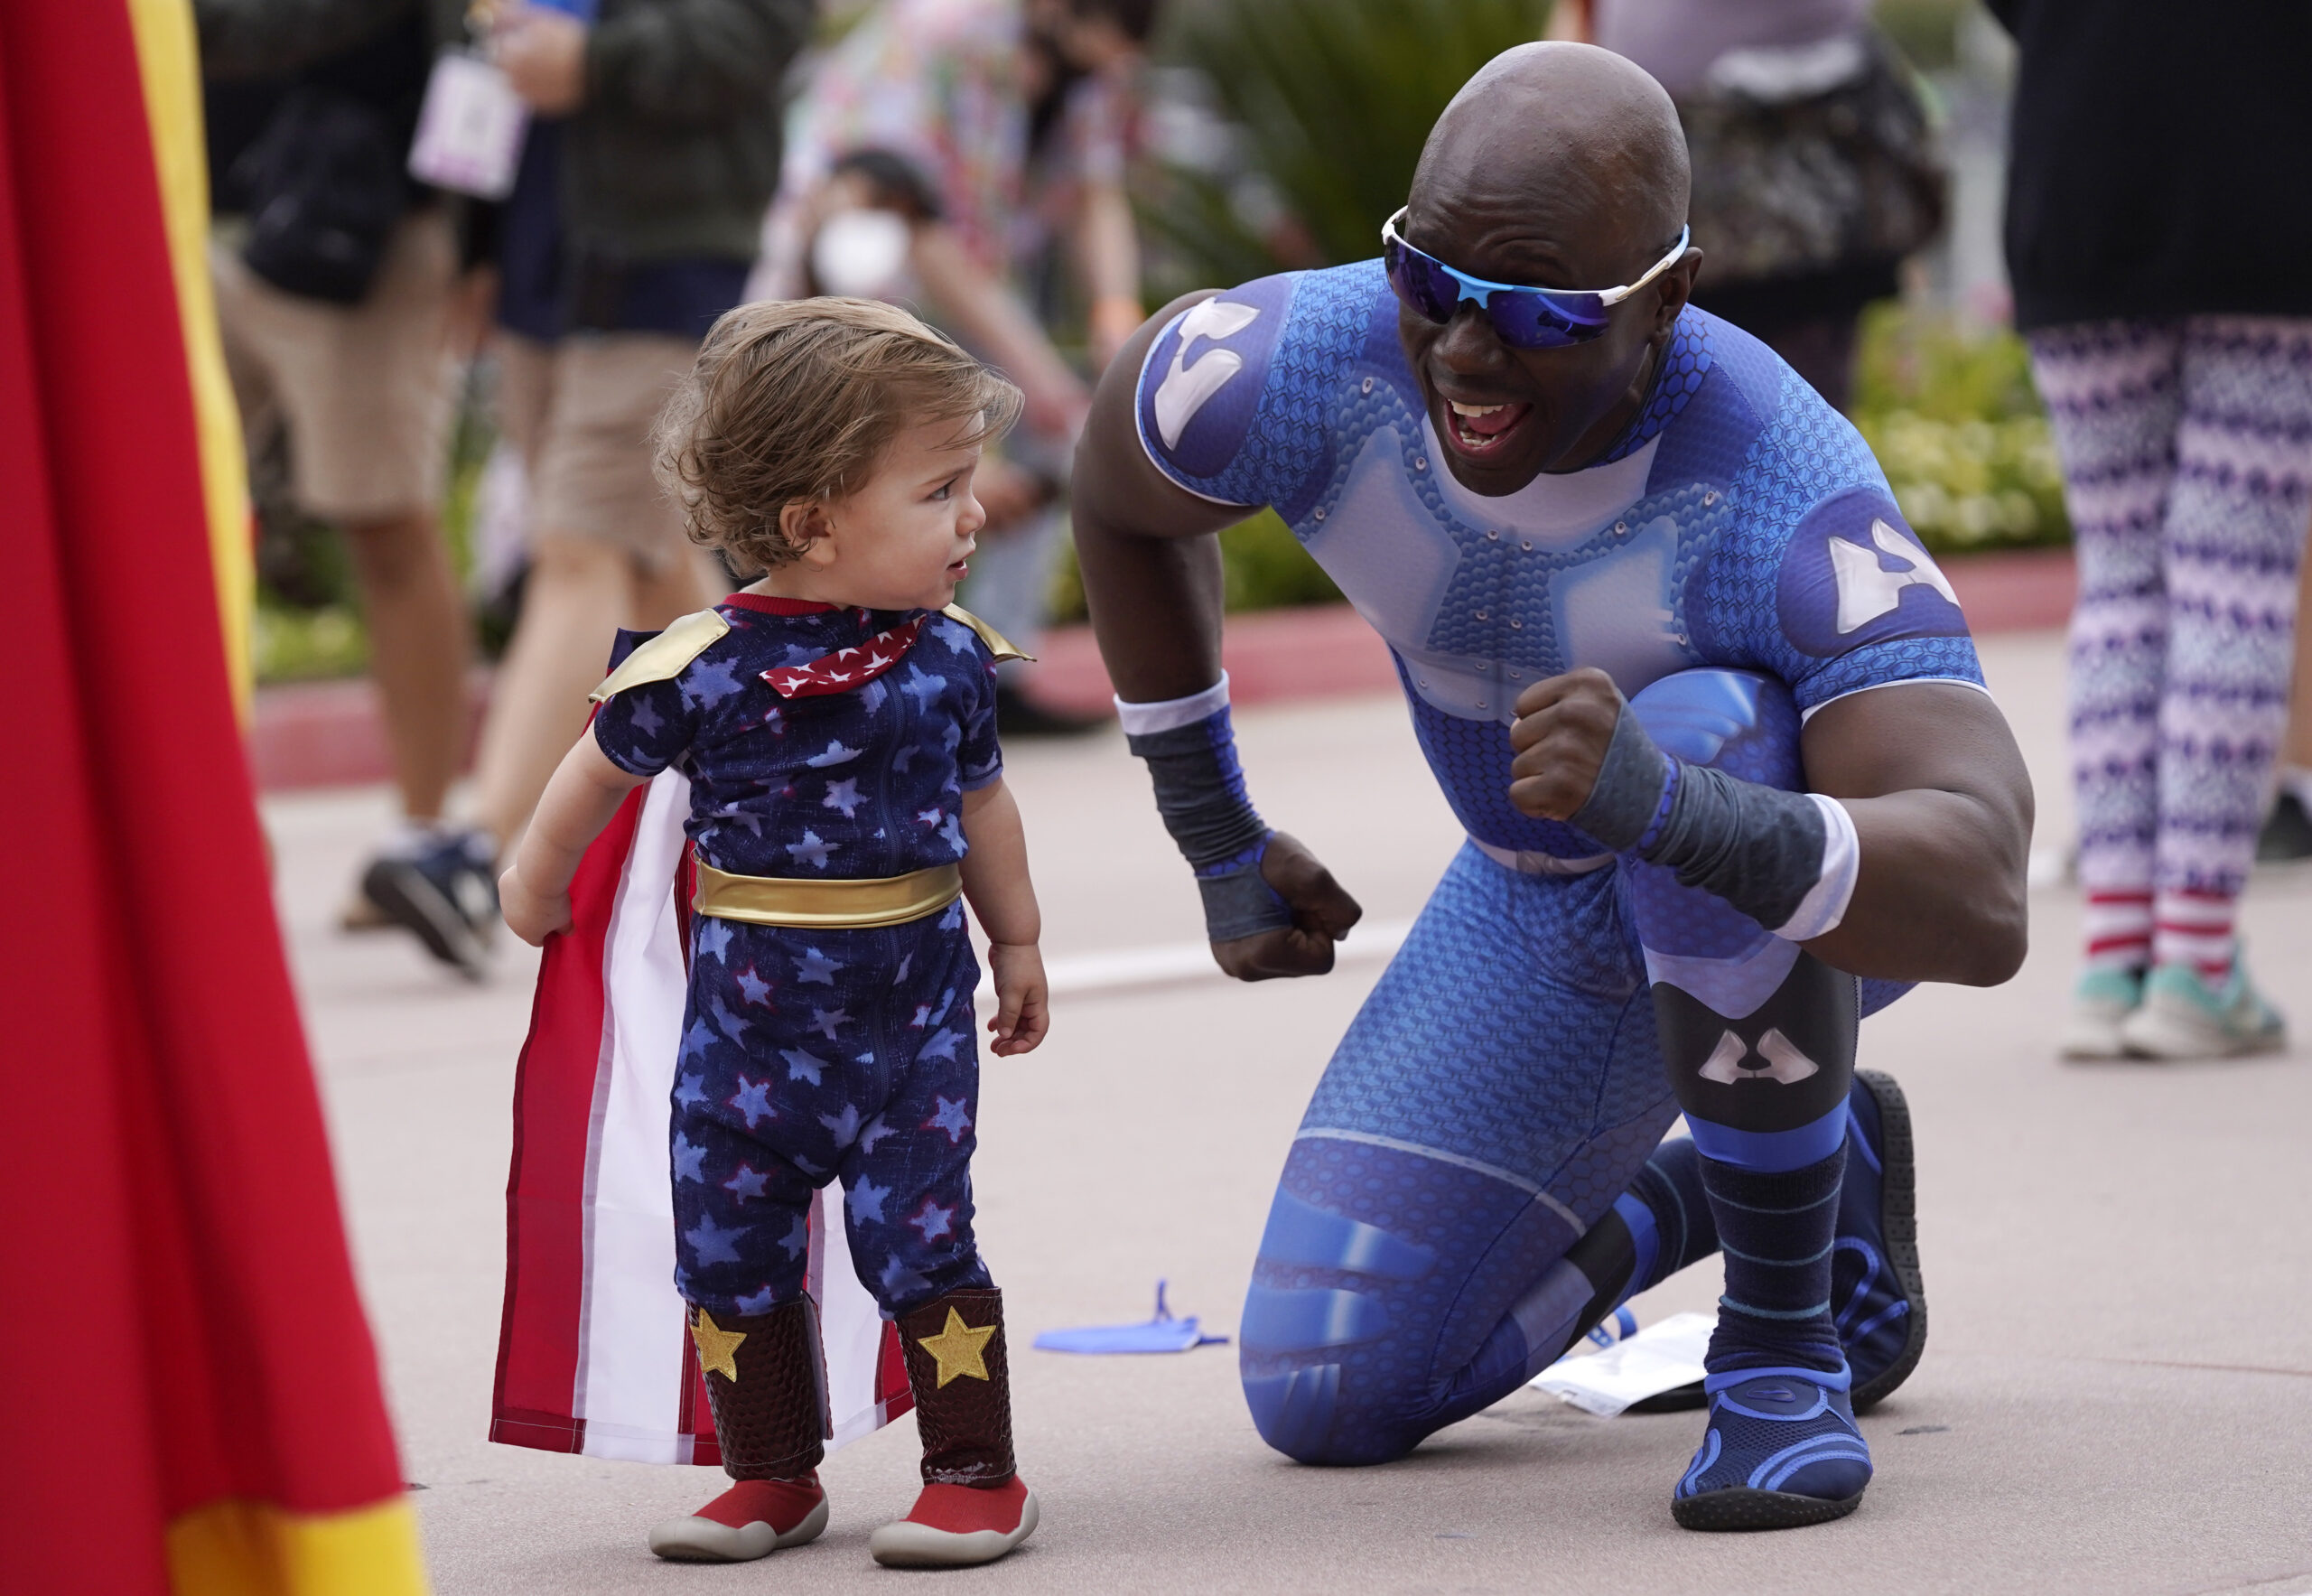 Jay Acey, right, dressed as A-Train from the television series "The Boys," mingles with Maddox Cruz, 1, of Orange, Calif., outside Preview Night at the 2022 Comic-Con International at the San Diego Convention Center, Wednesday, July 20, 2022, in San Diego. (AP Photo/Chris Pizzello)